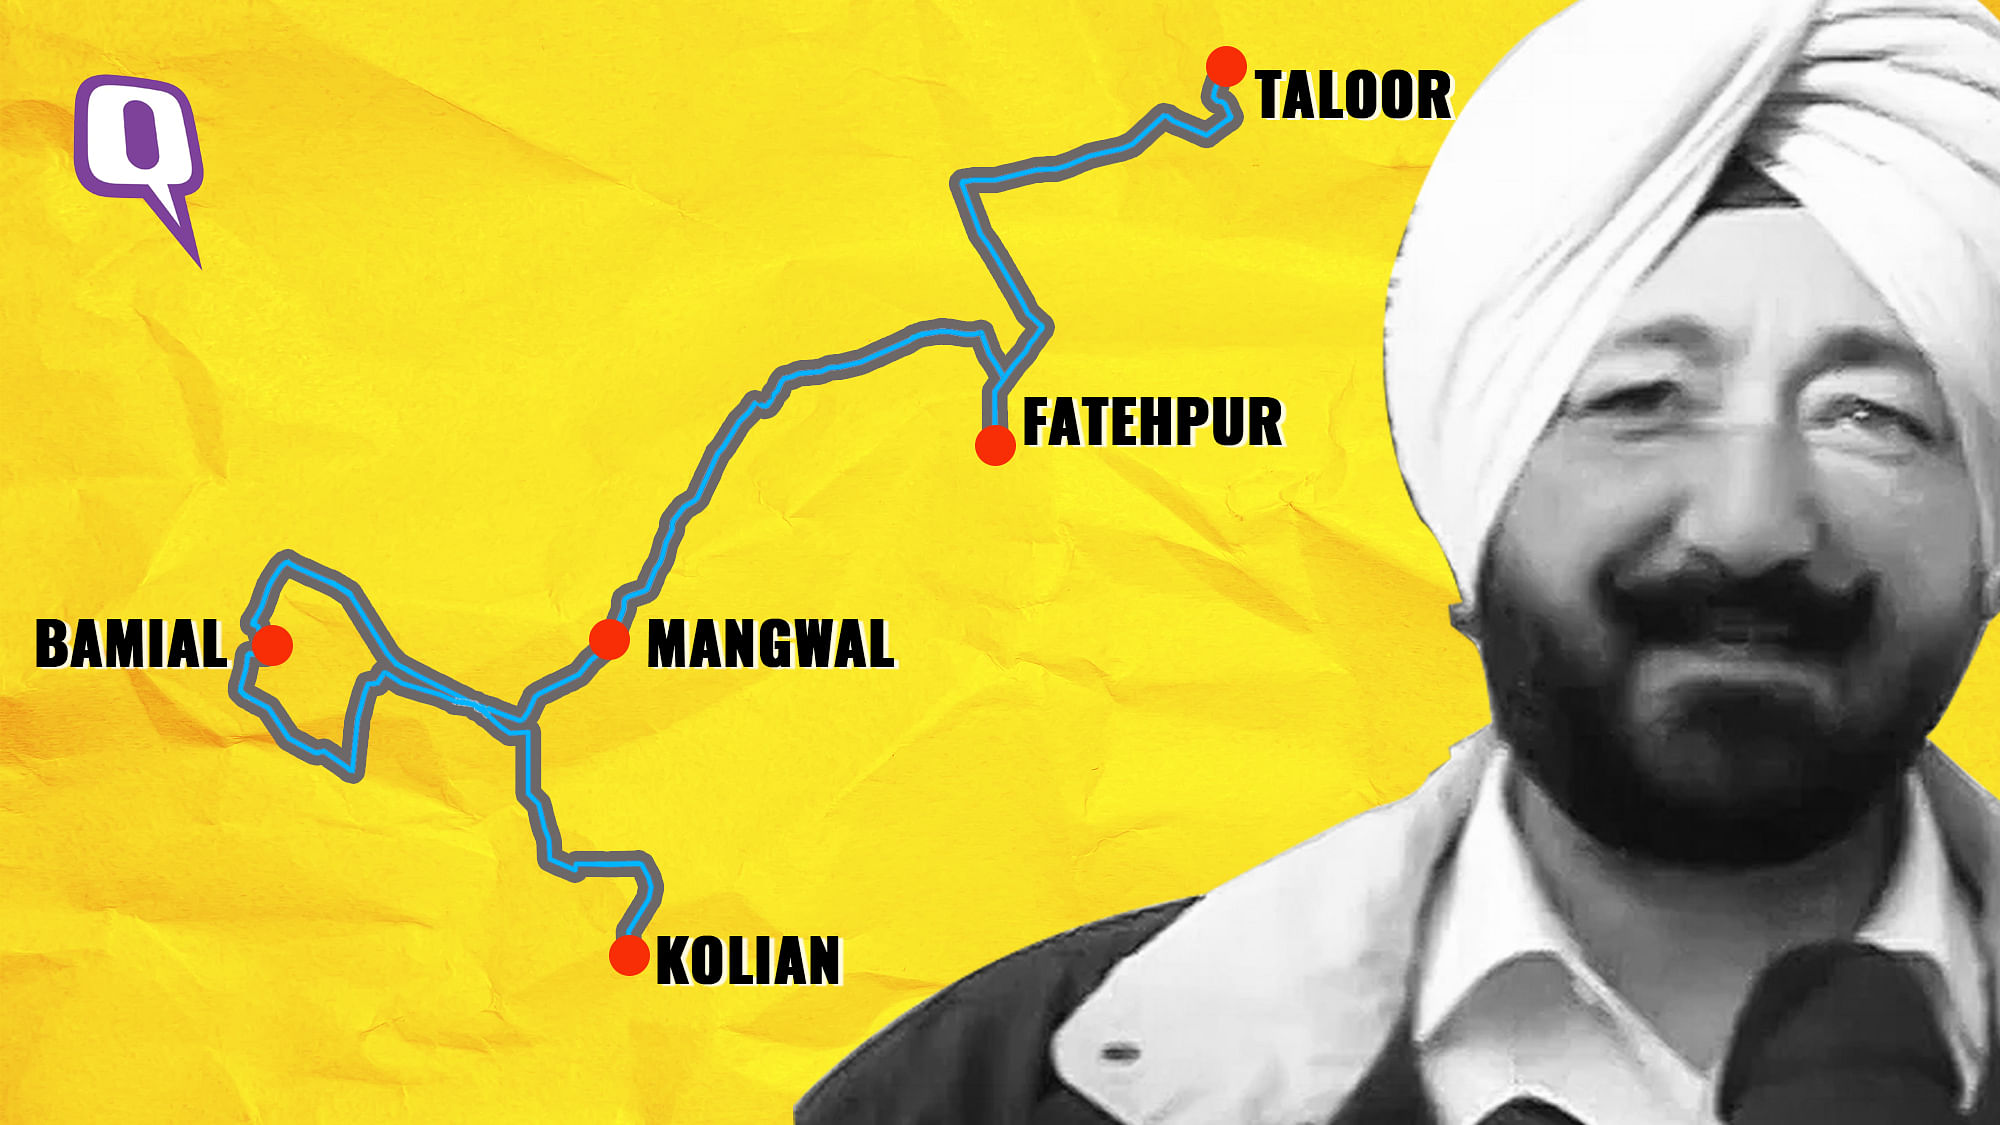 Unexplained visit, missing hours, too many coincidences. Here’s what makes SP Salwinder Singh’s story suspicious.